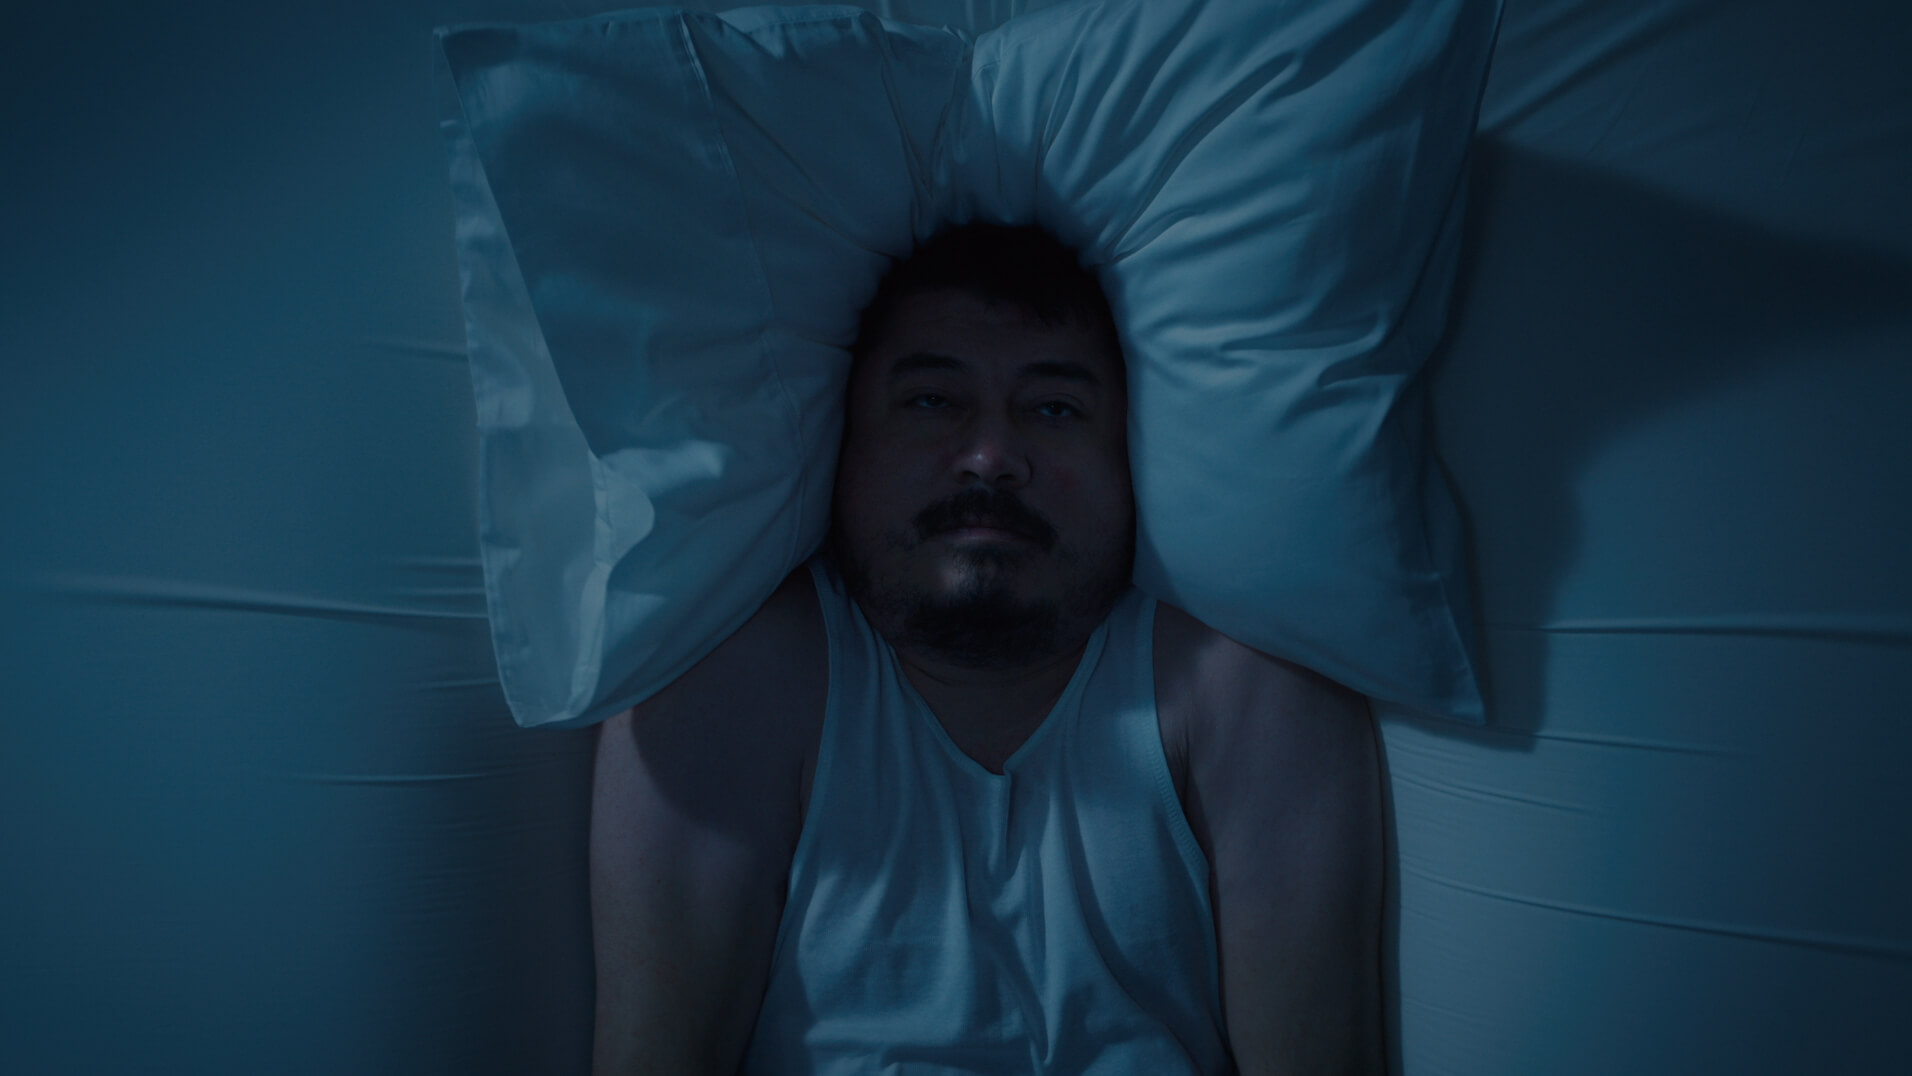 Koala Kloudcell television campaign commercial showing man sinking into his bed.